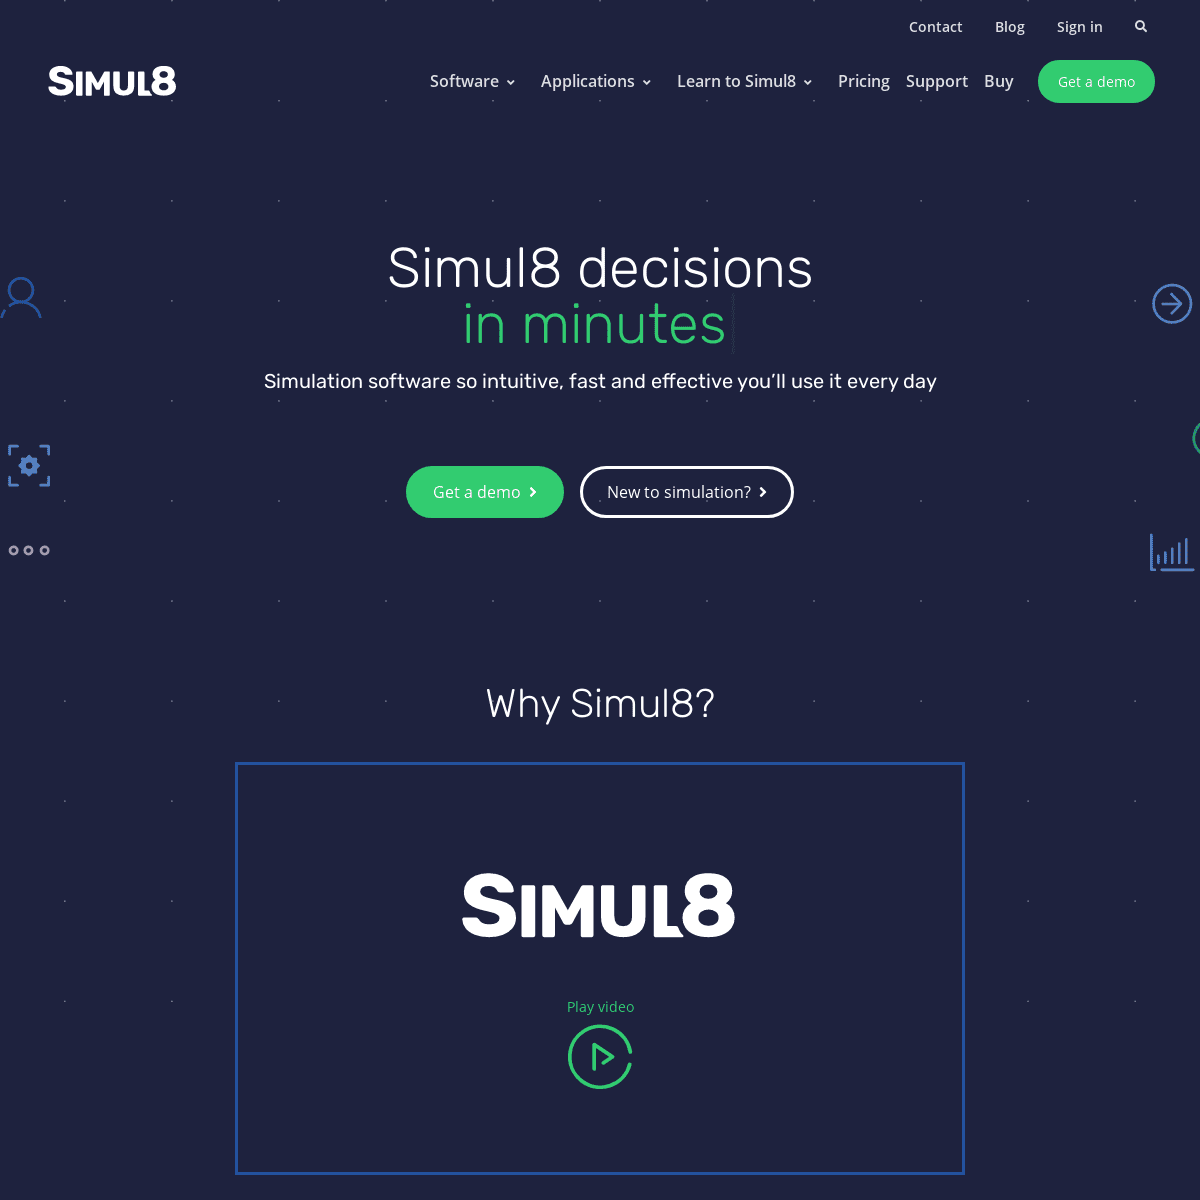 A complete backup of https://simul8.com